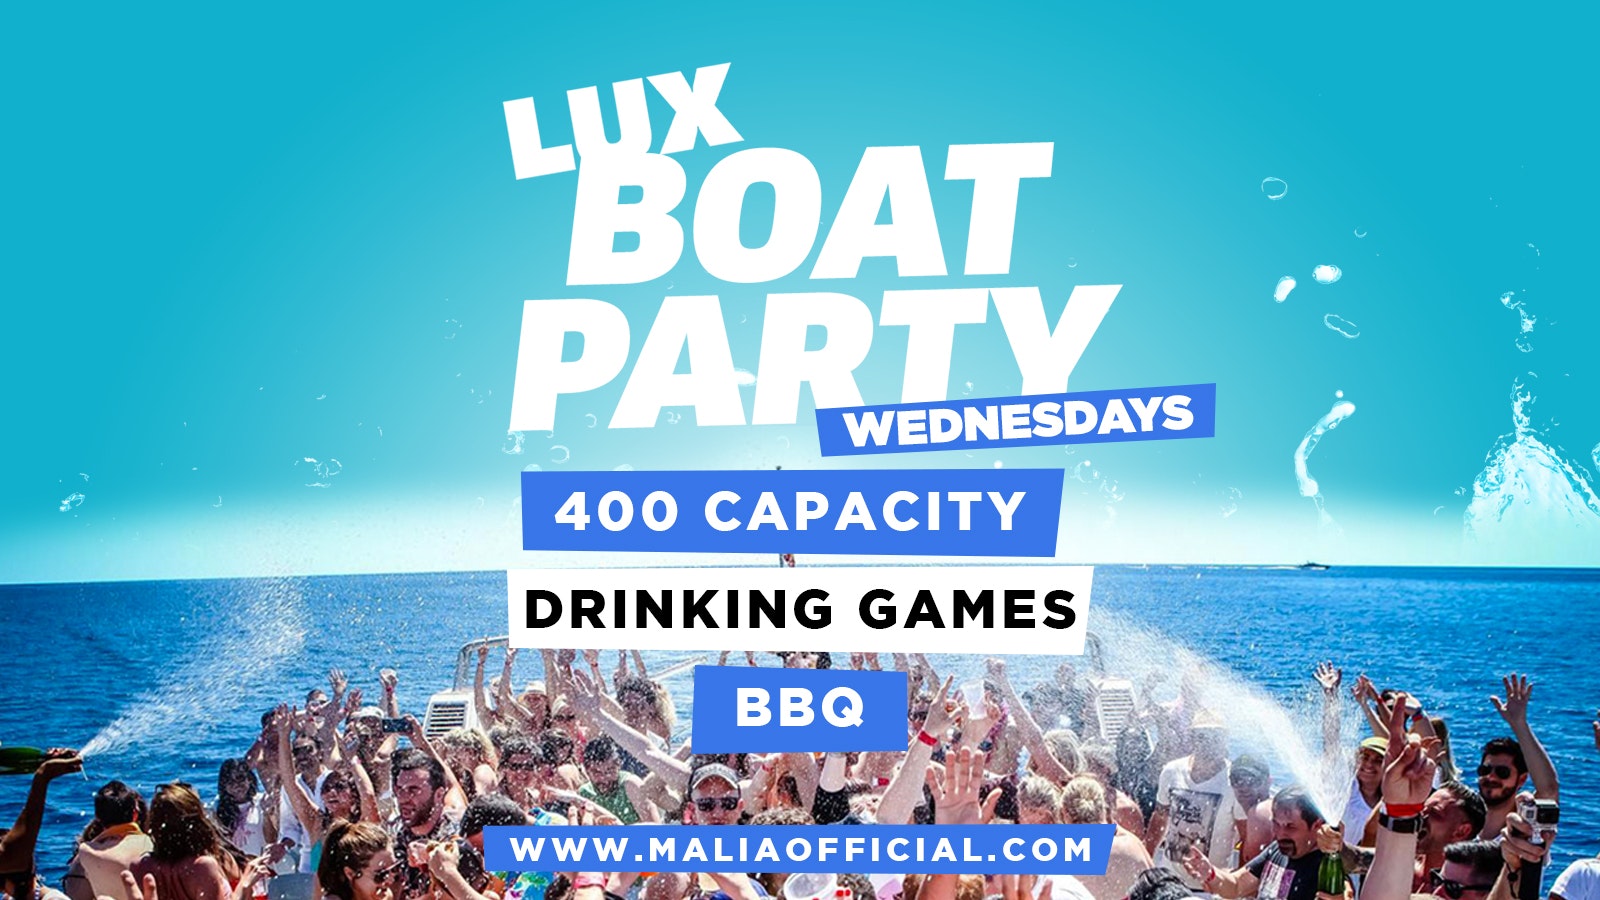 Lux Boat Party